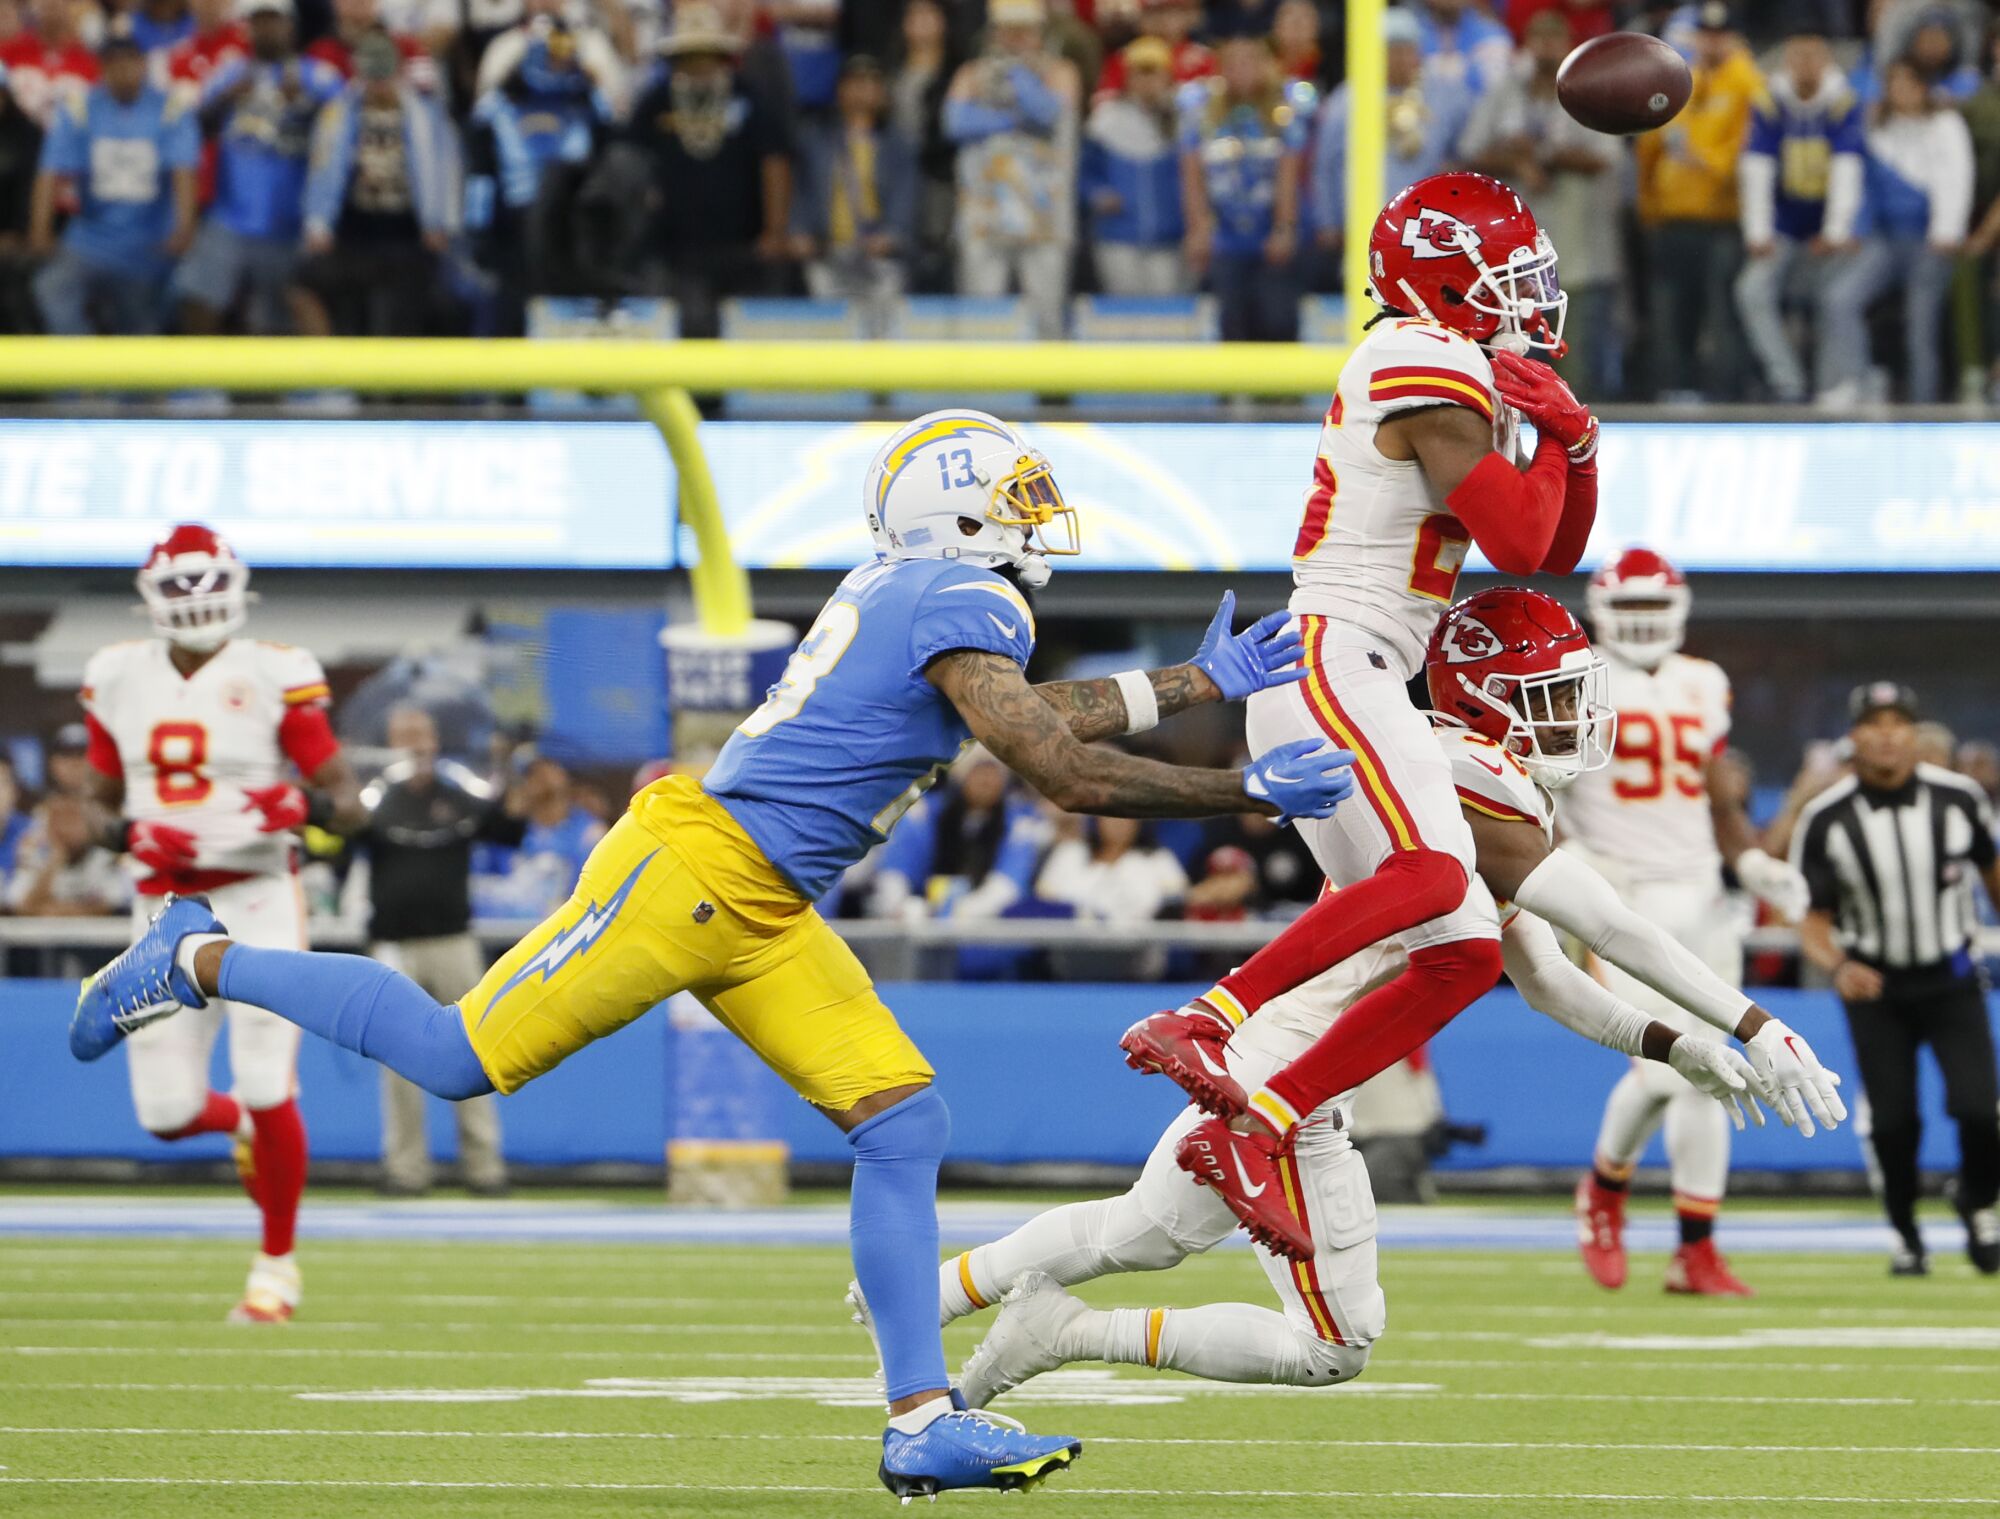 Chiefs safety Deon Bush deflects a pass intended for Chargers wide receiver Keenan Allen to seal a win.